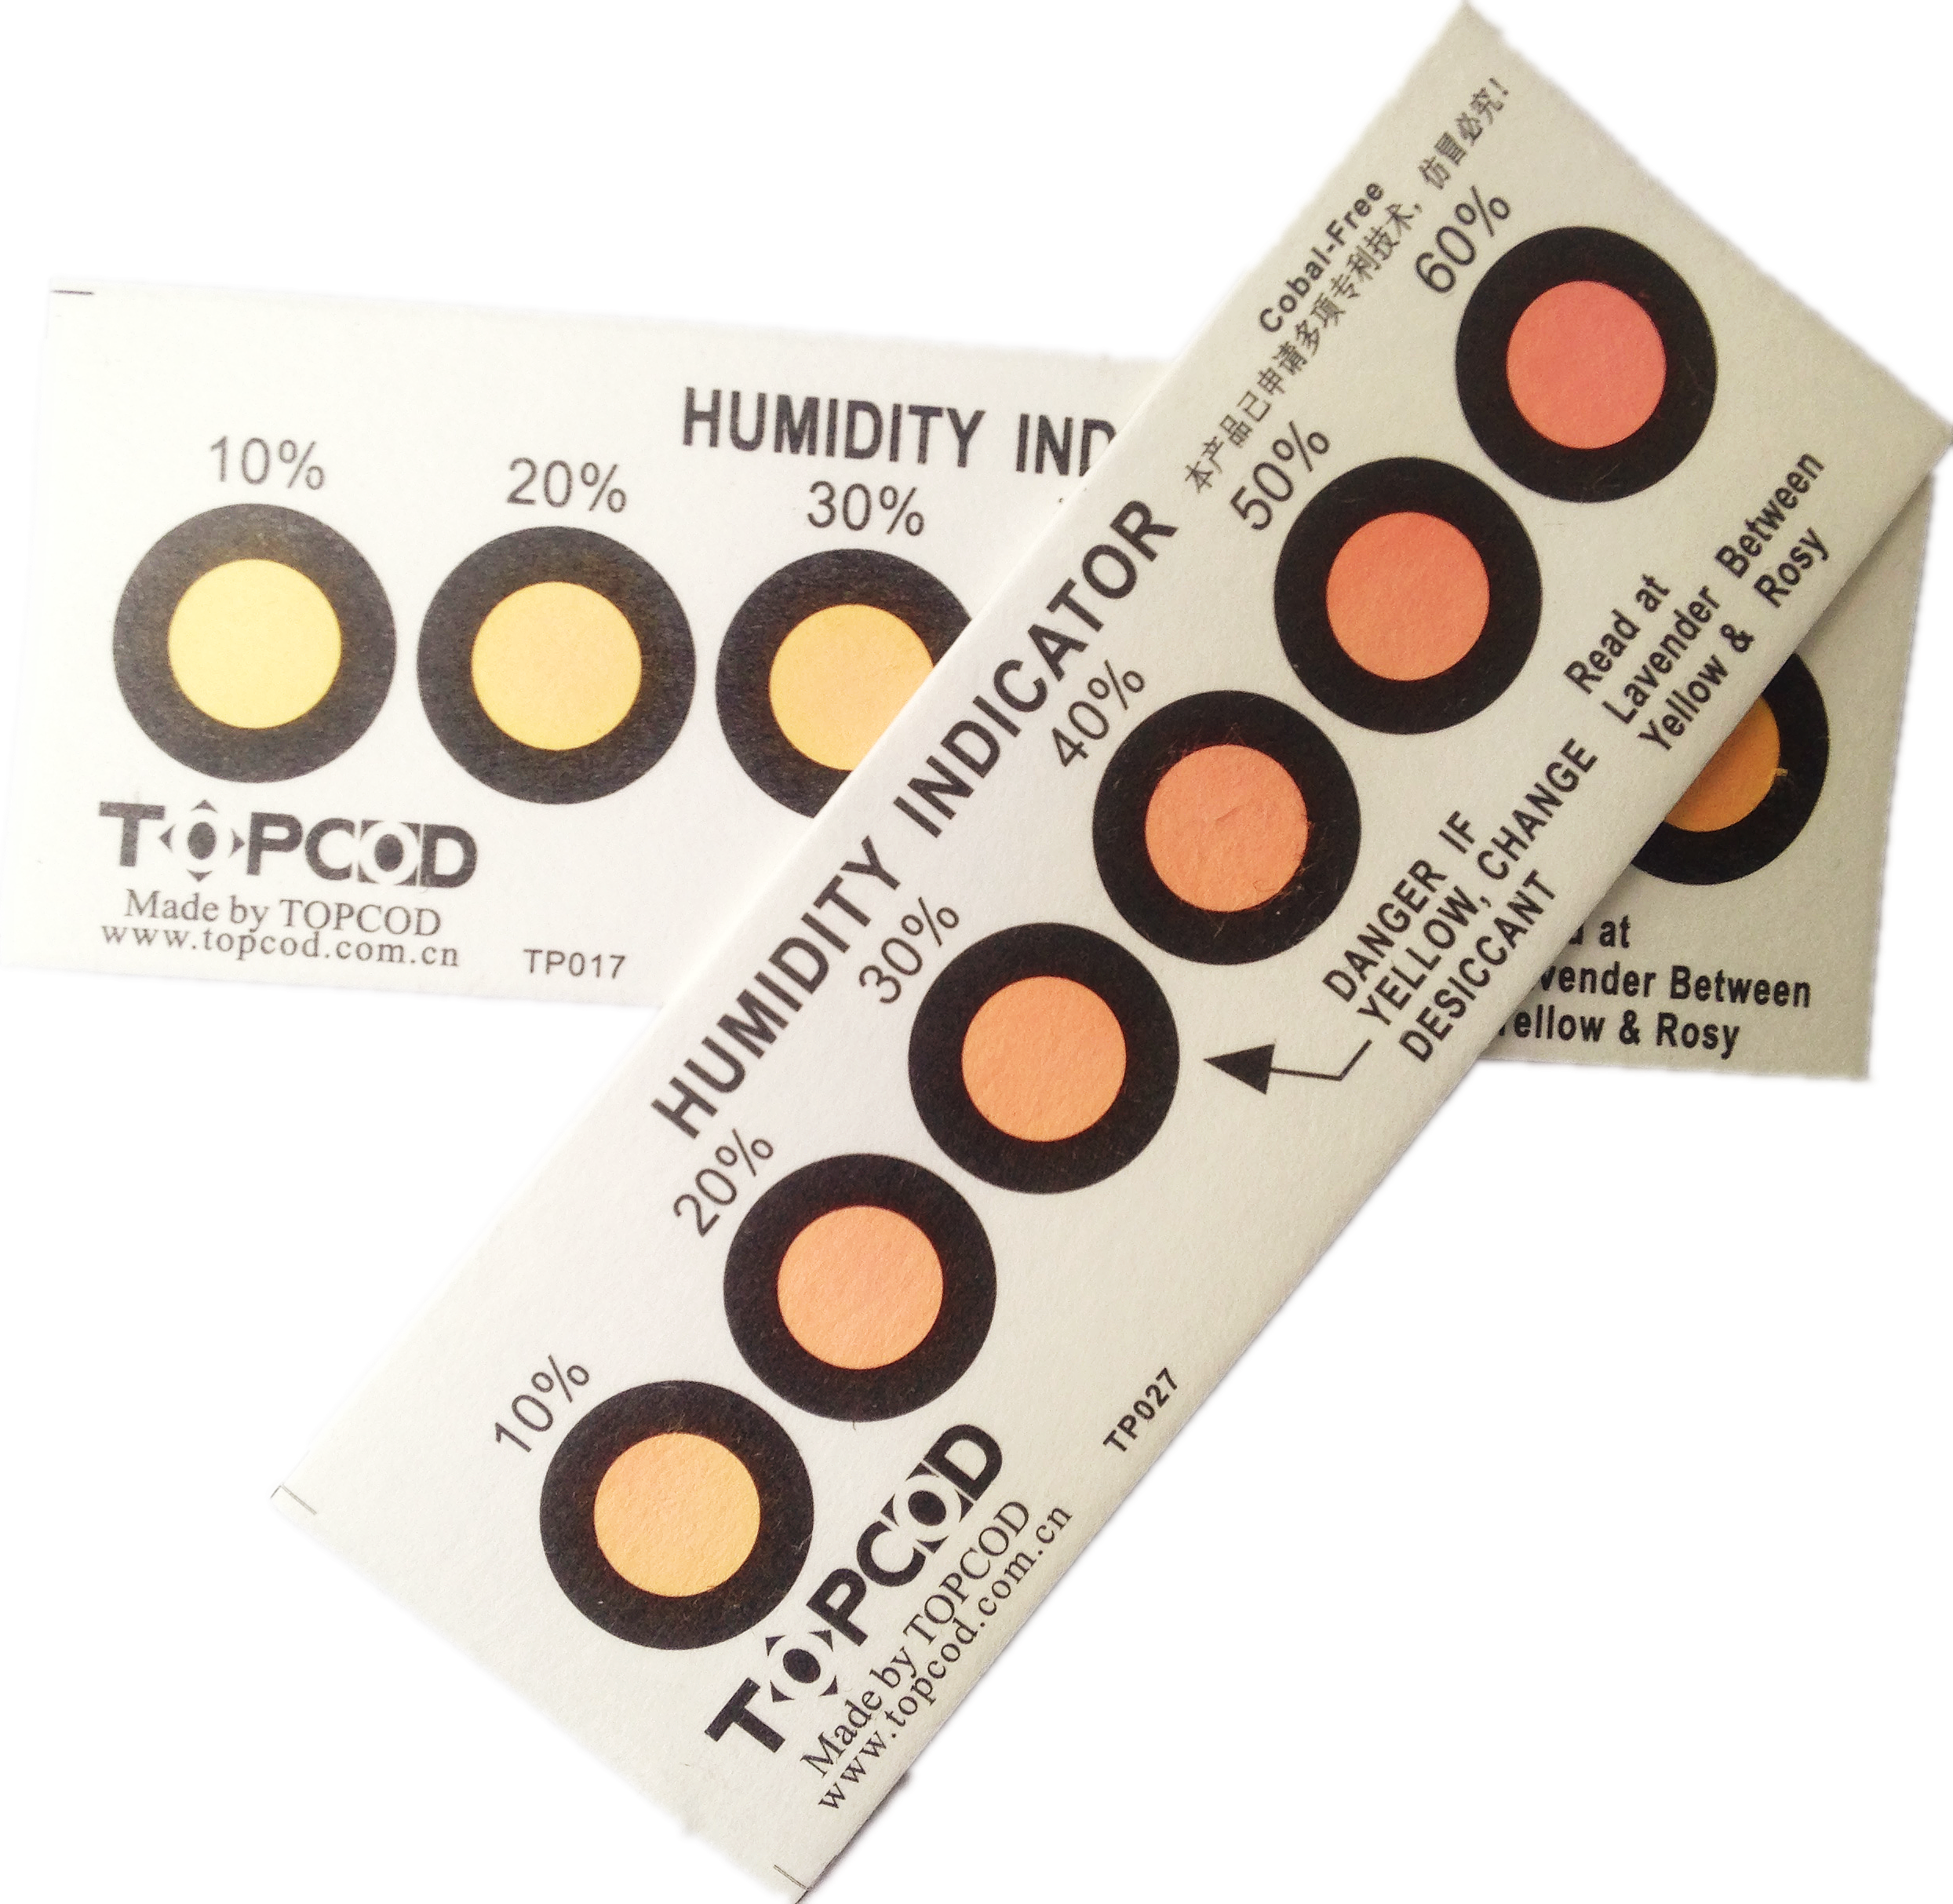 Never Worry About Moisture Damage Again with Our Humidity Indicator Card